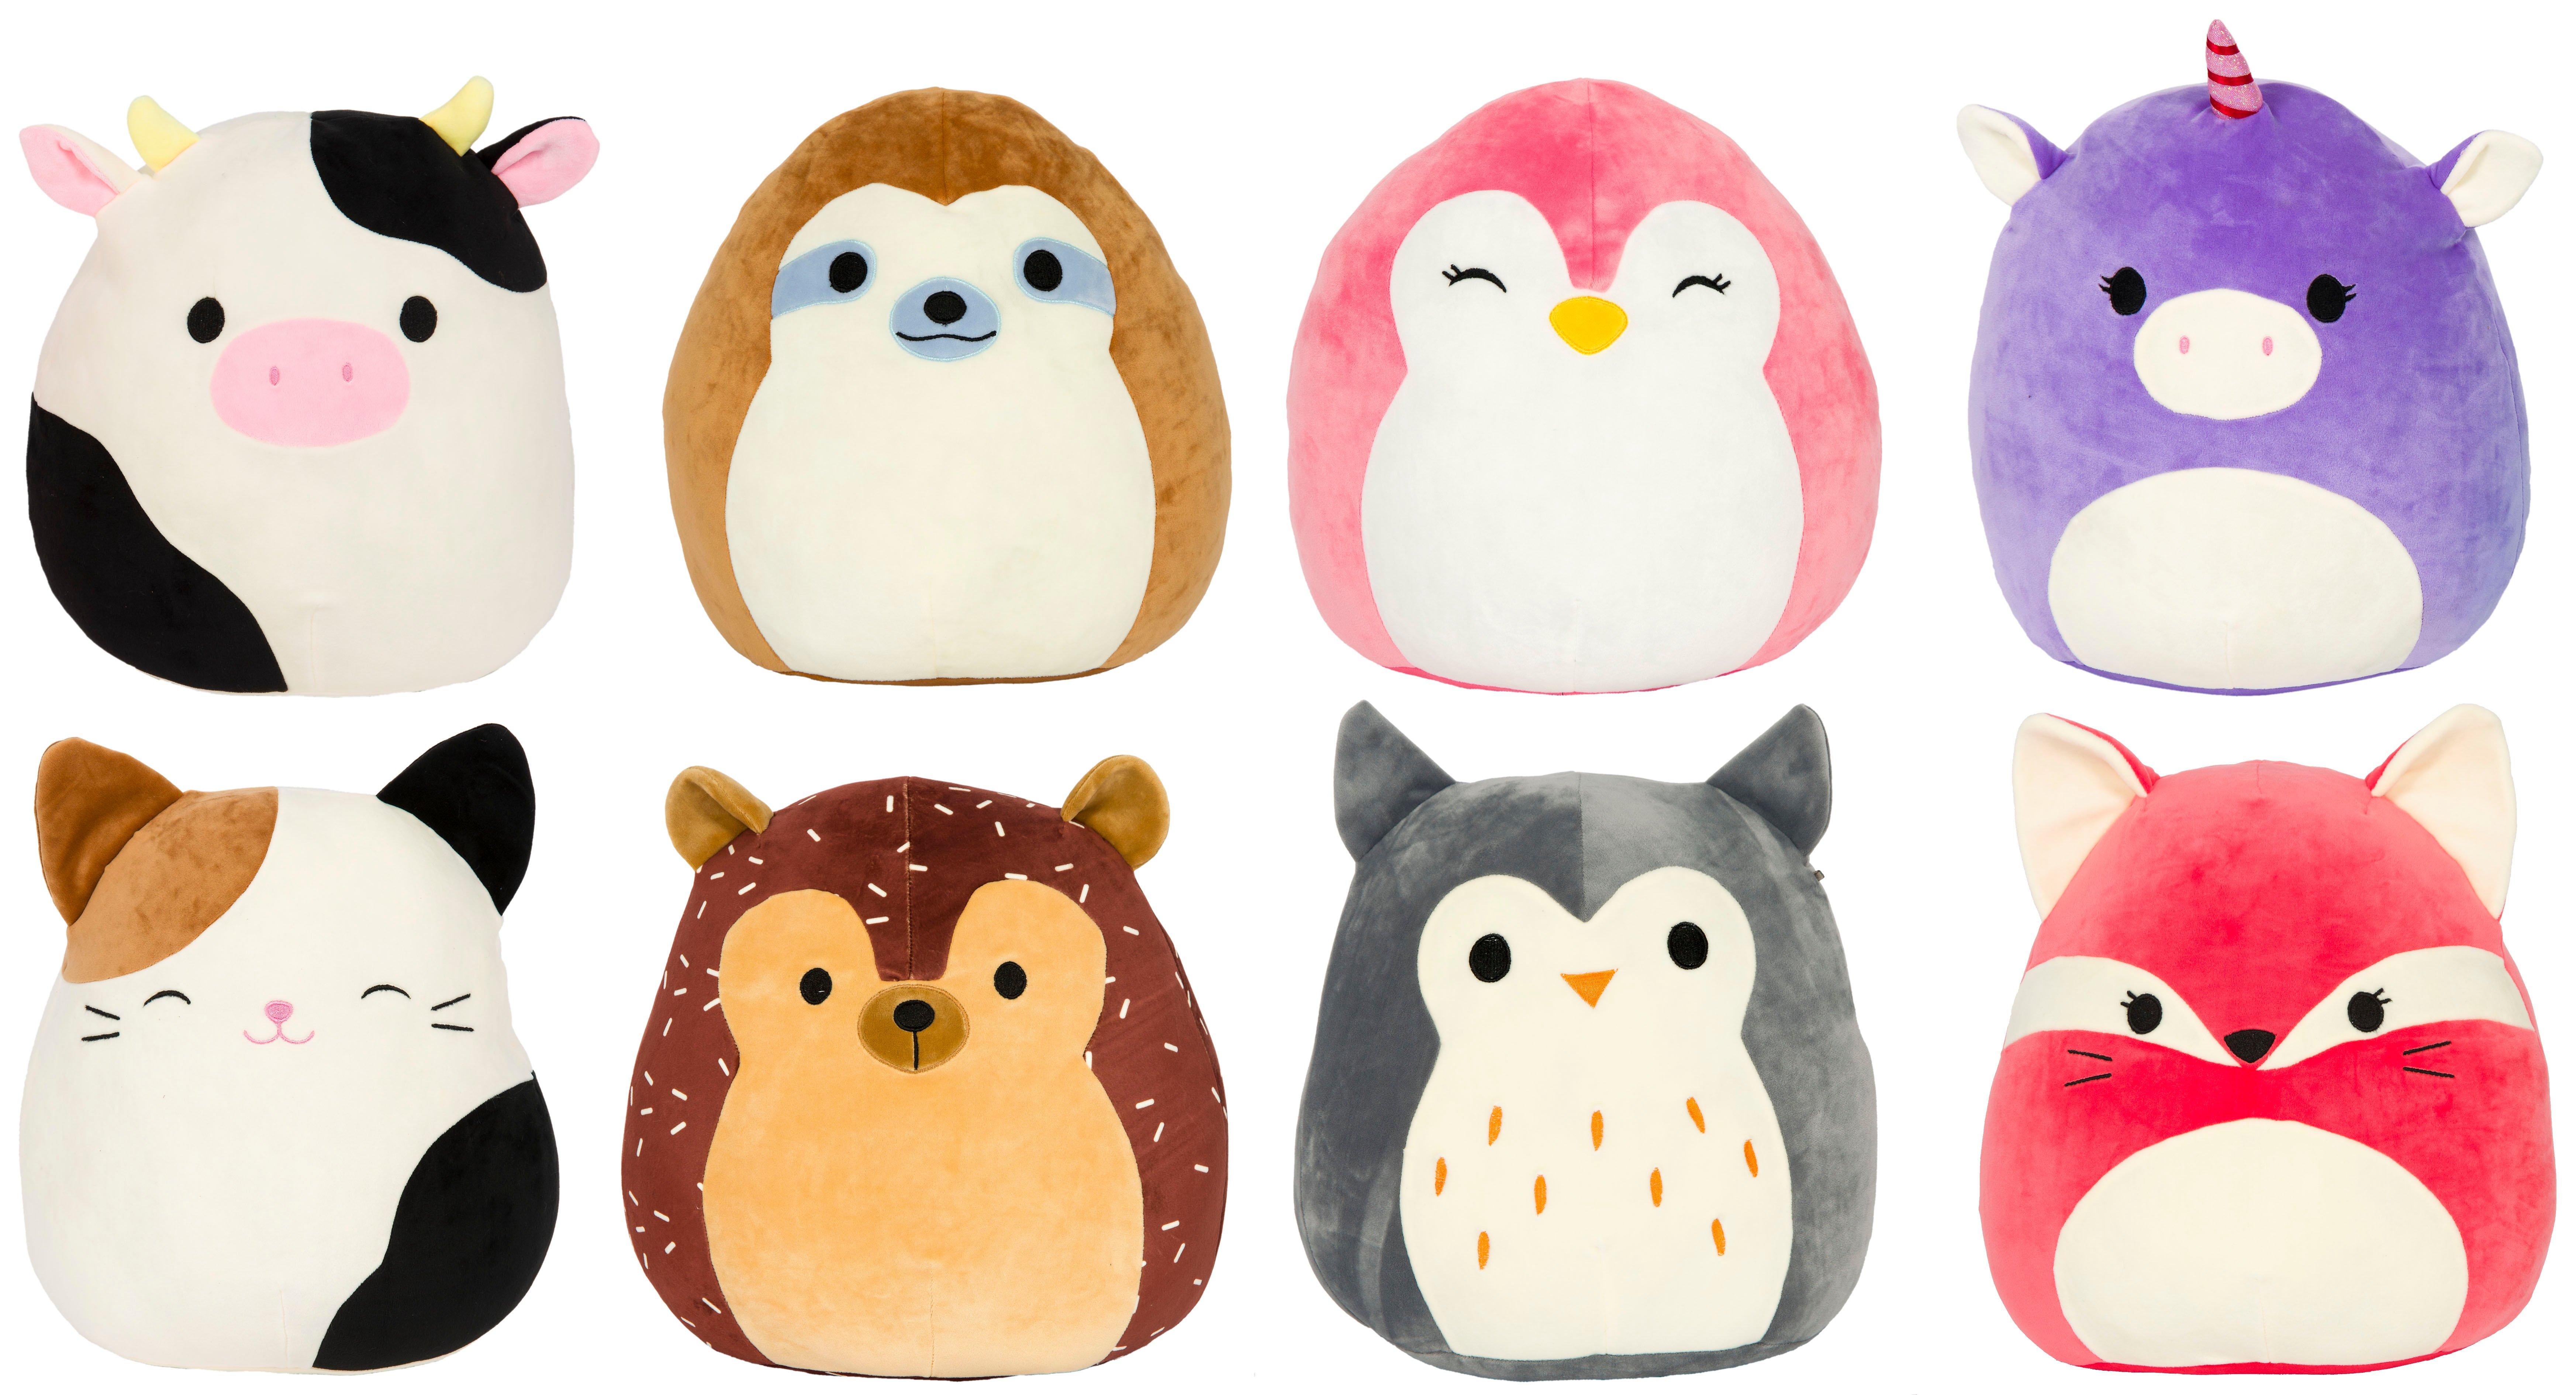 squishmallows set of 8